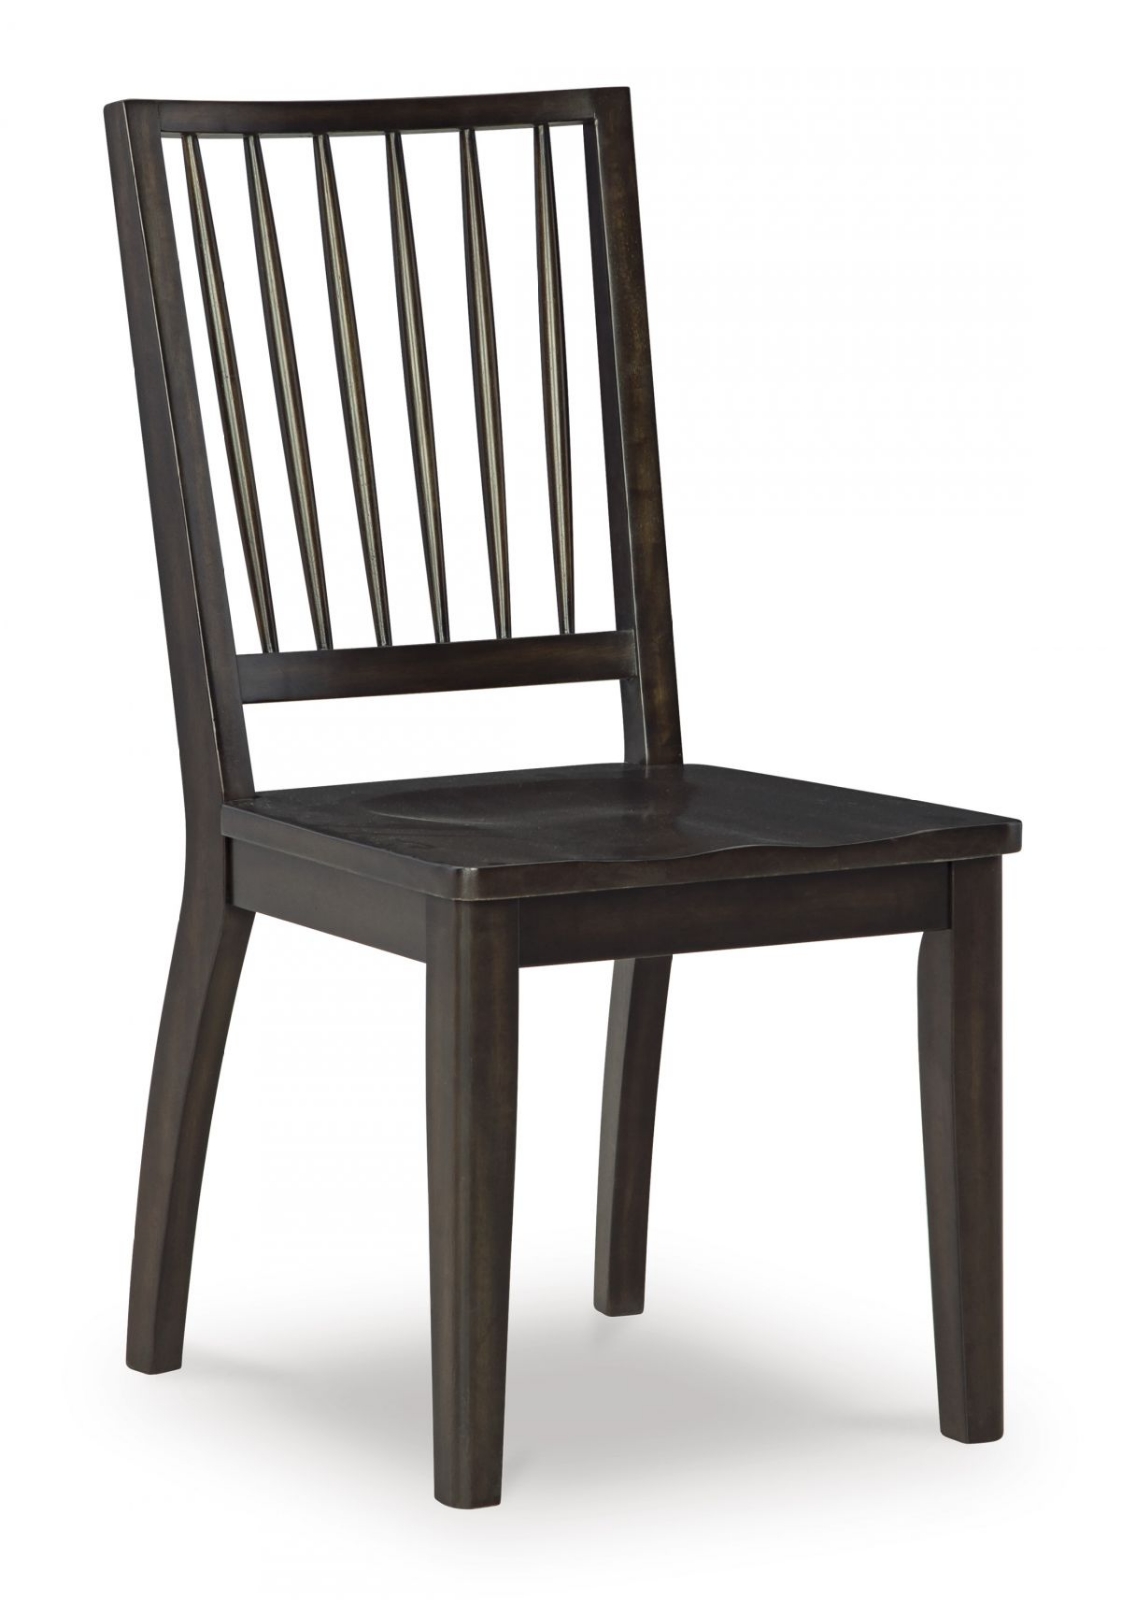 Picture of Charterton Dining Chair